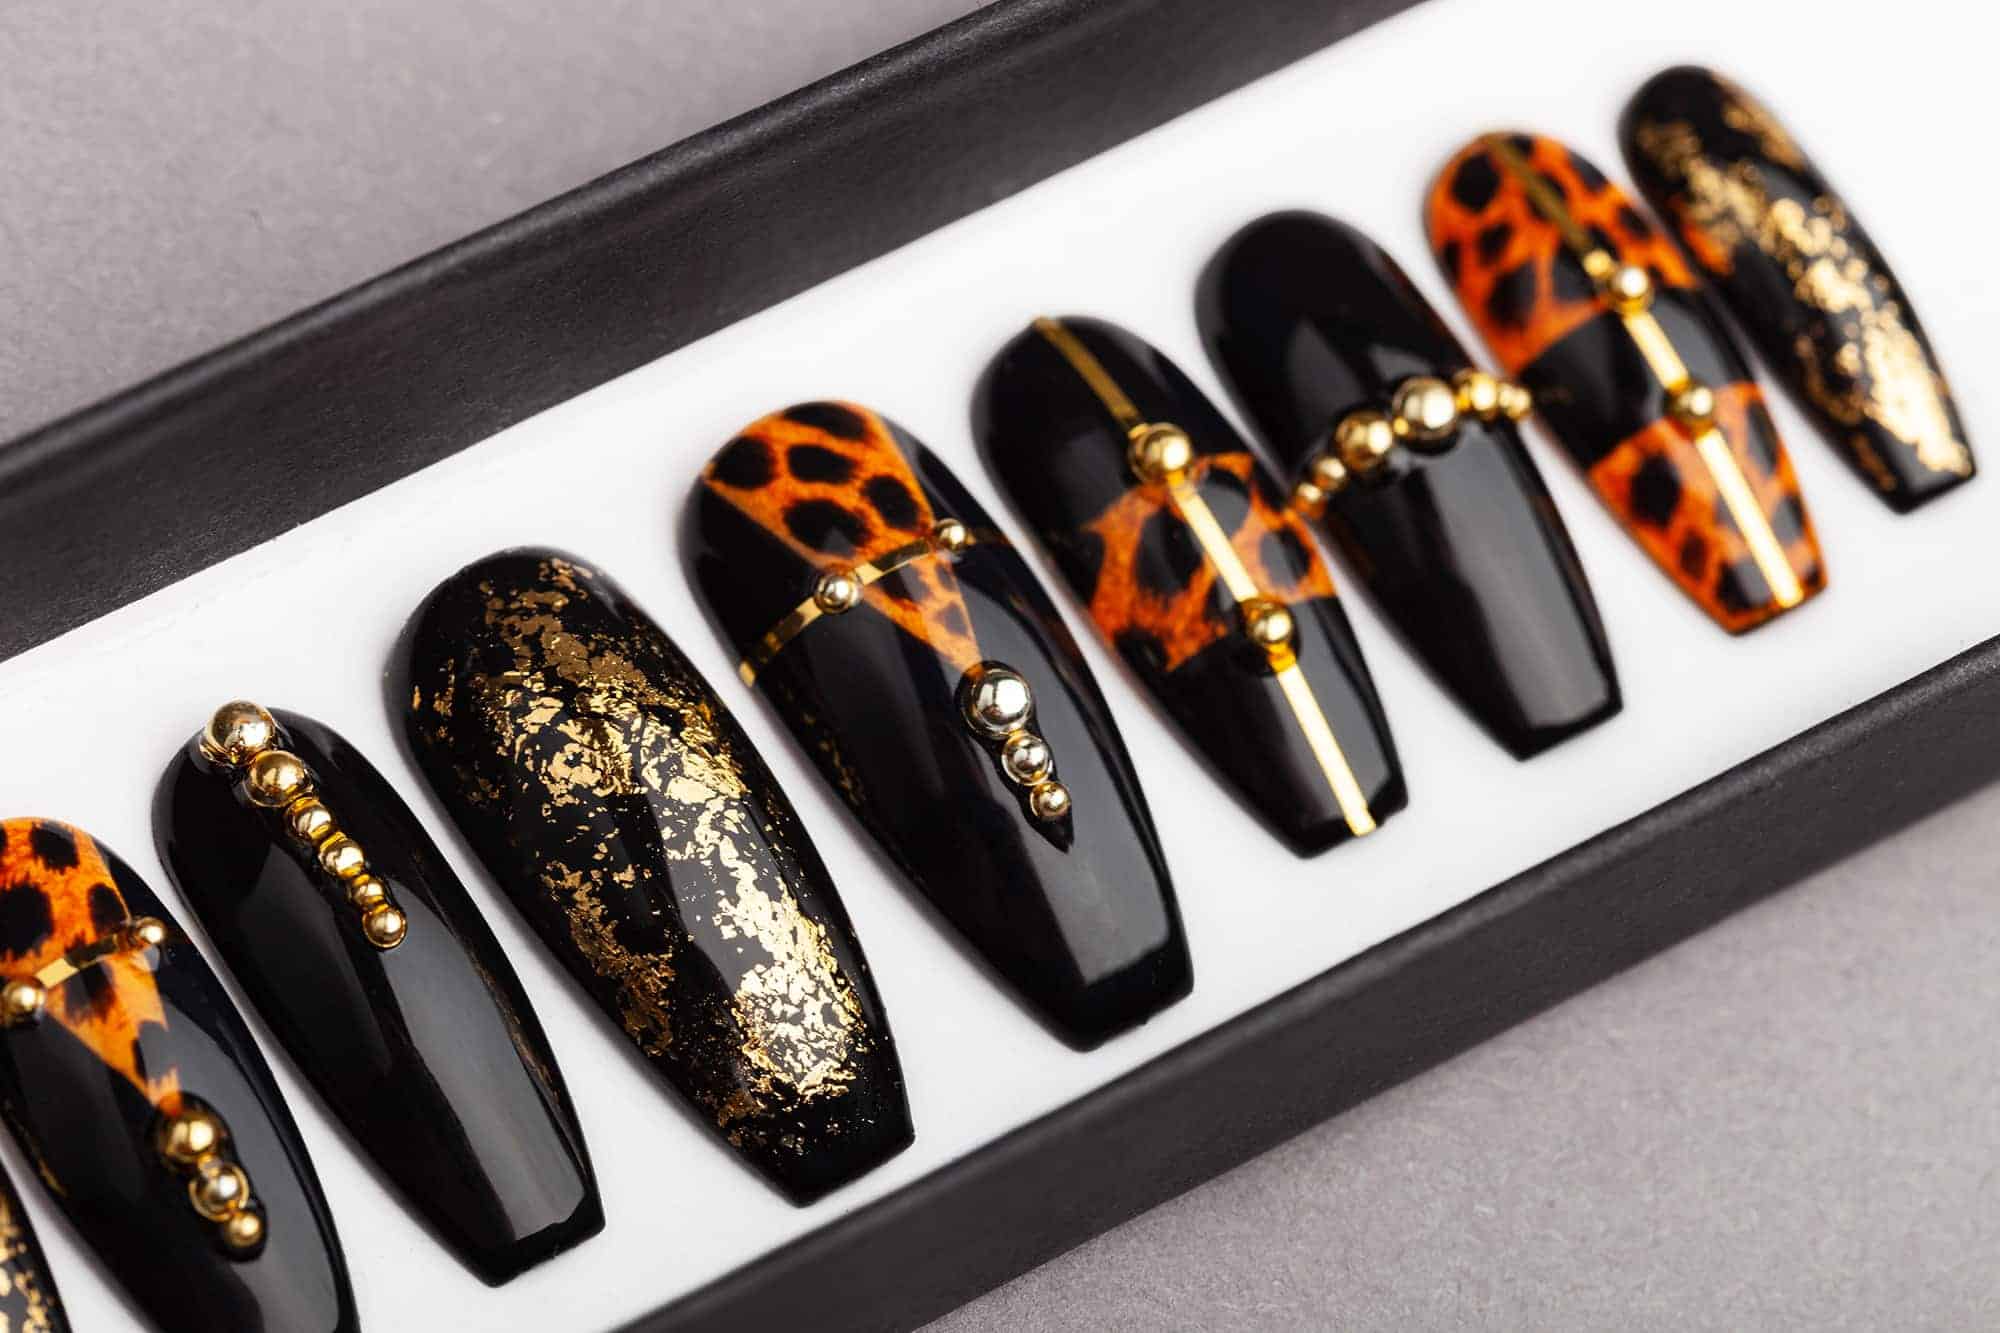 Leopard Press on Nails with Golden Foil | Hand-painted Nail Art | Fake Nails | False Nails | Glue On Nails